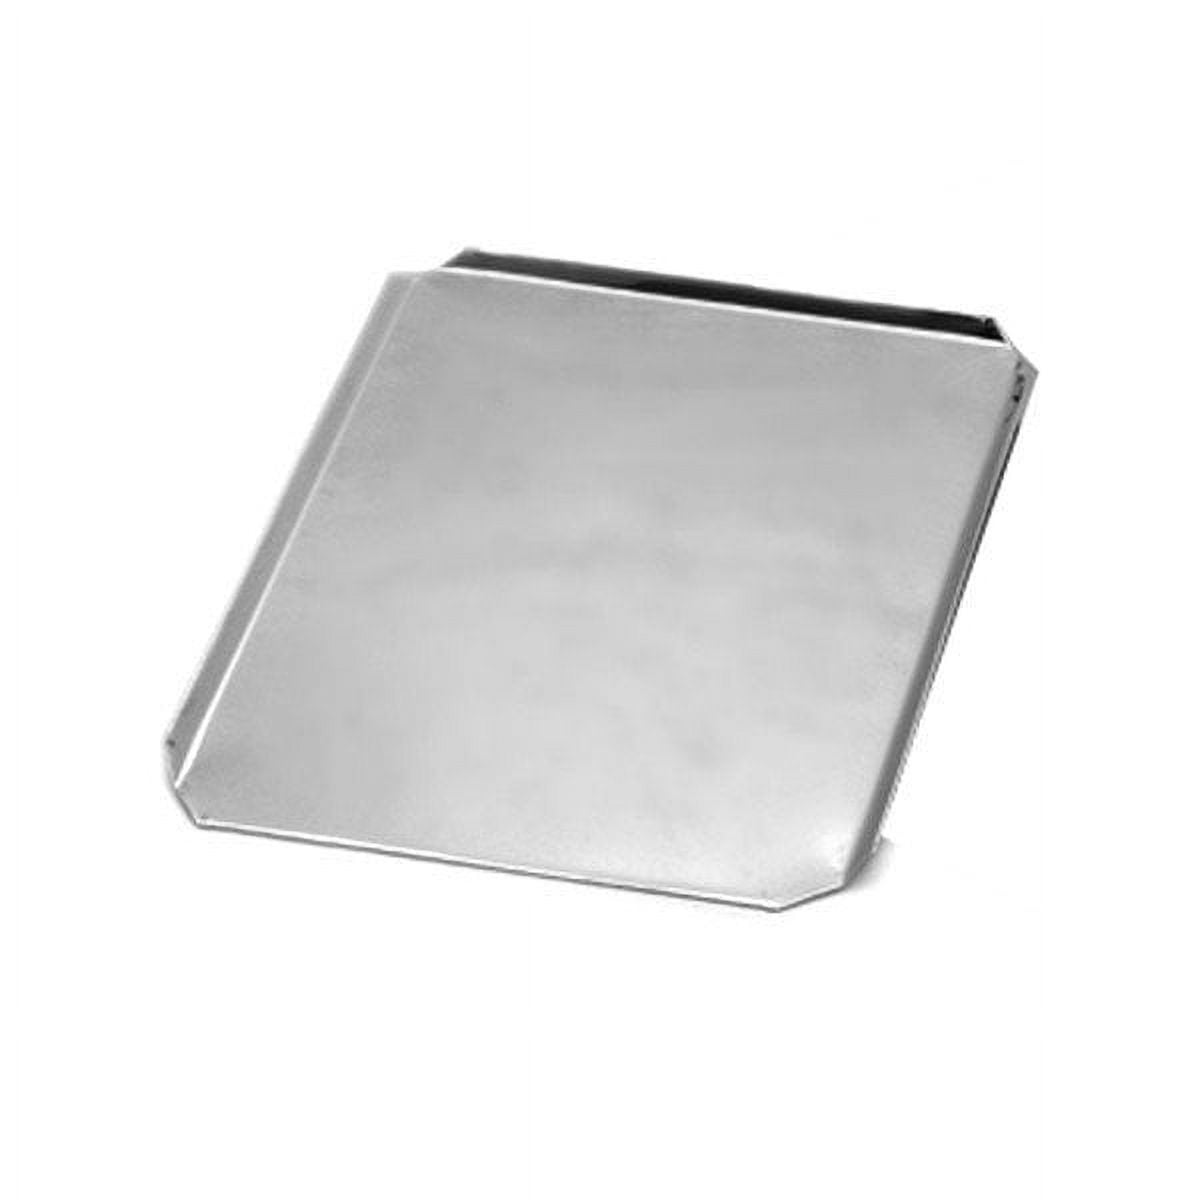 Norpro 12 x 16 Stainless Steel Cookie Sheet